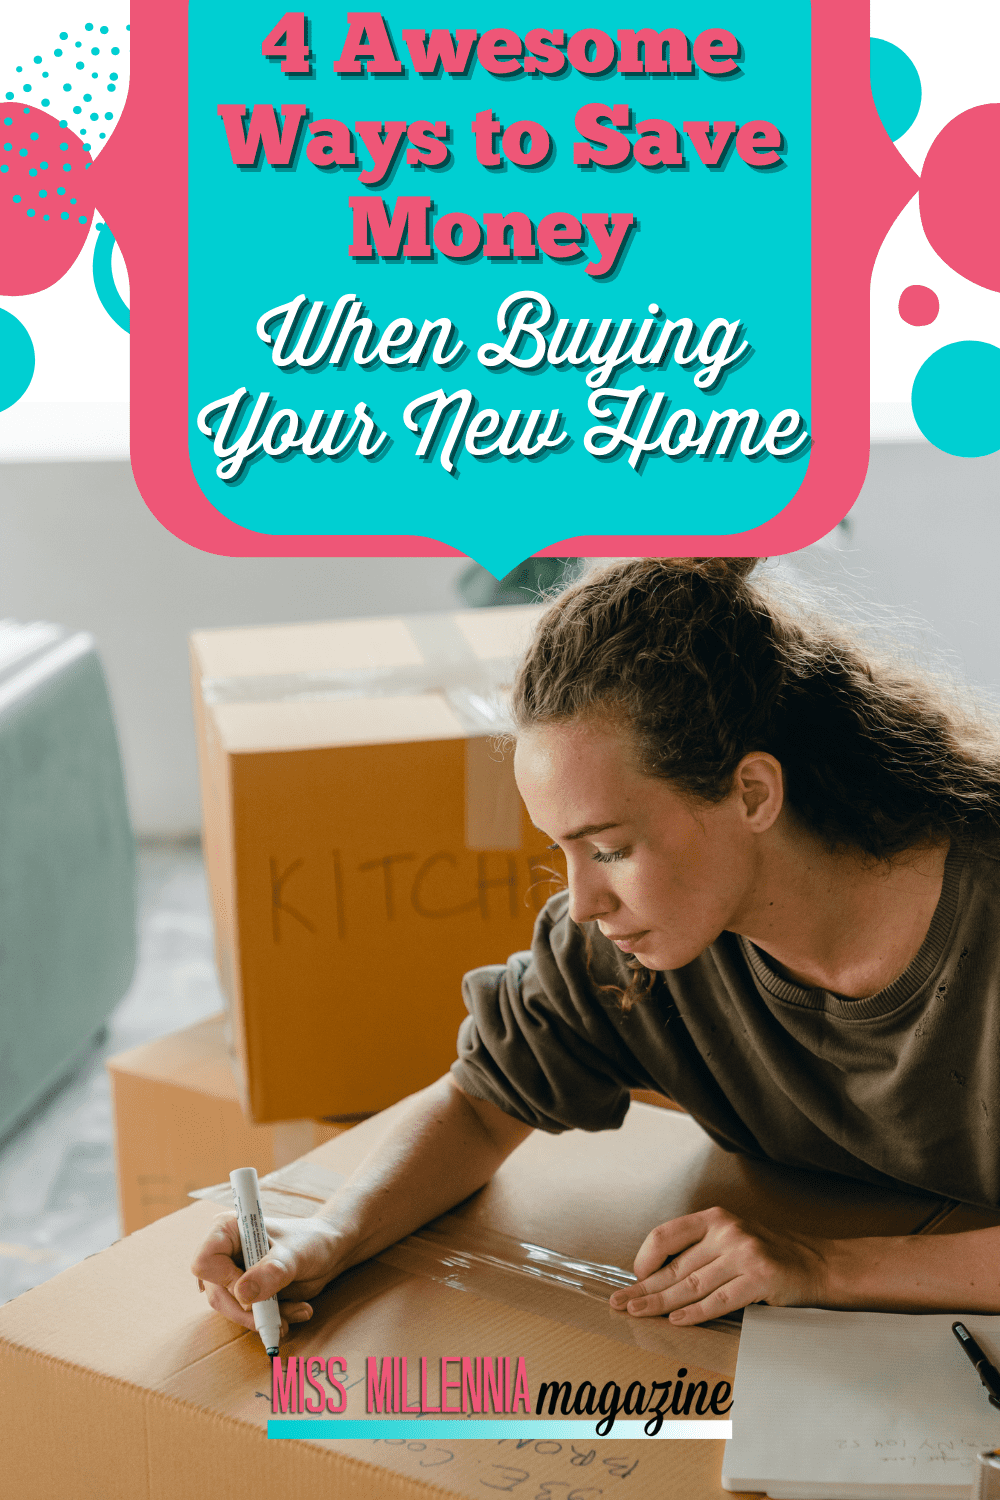 4 Awesome Ways to Save Money When Buying Your New Home